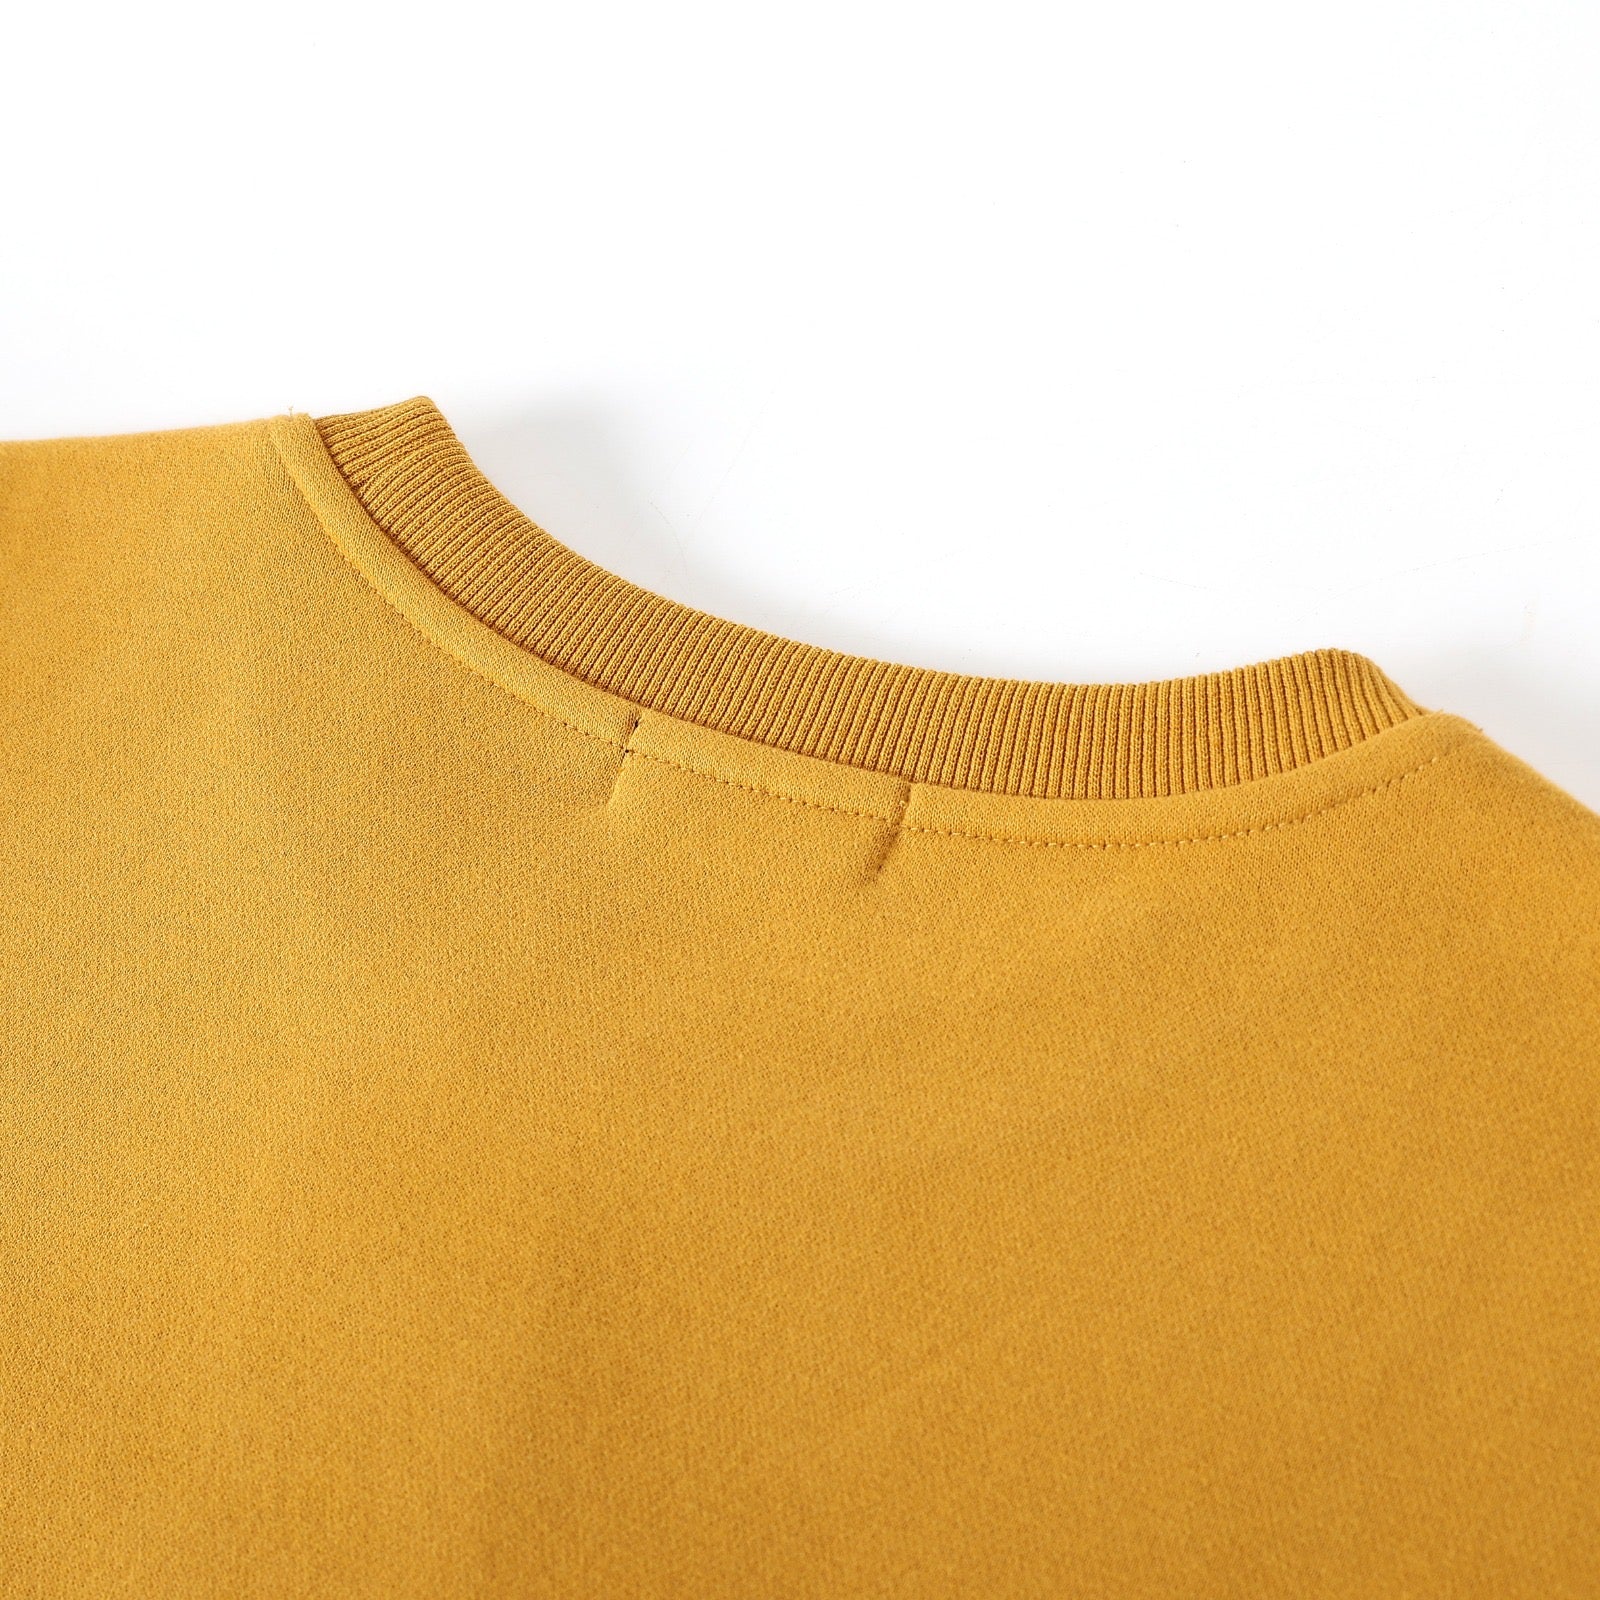 Omega Crest Chenille Crewneck – The King McNeal Collection